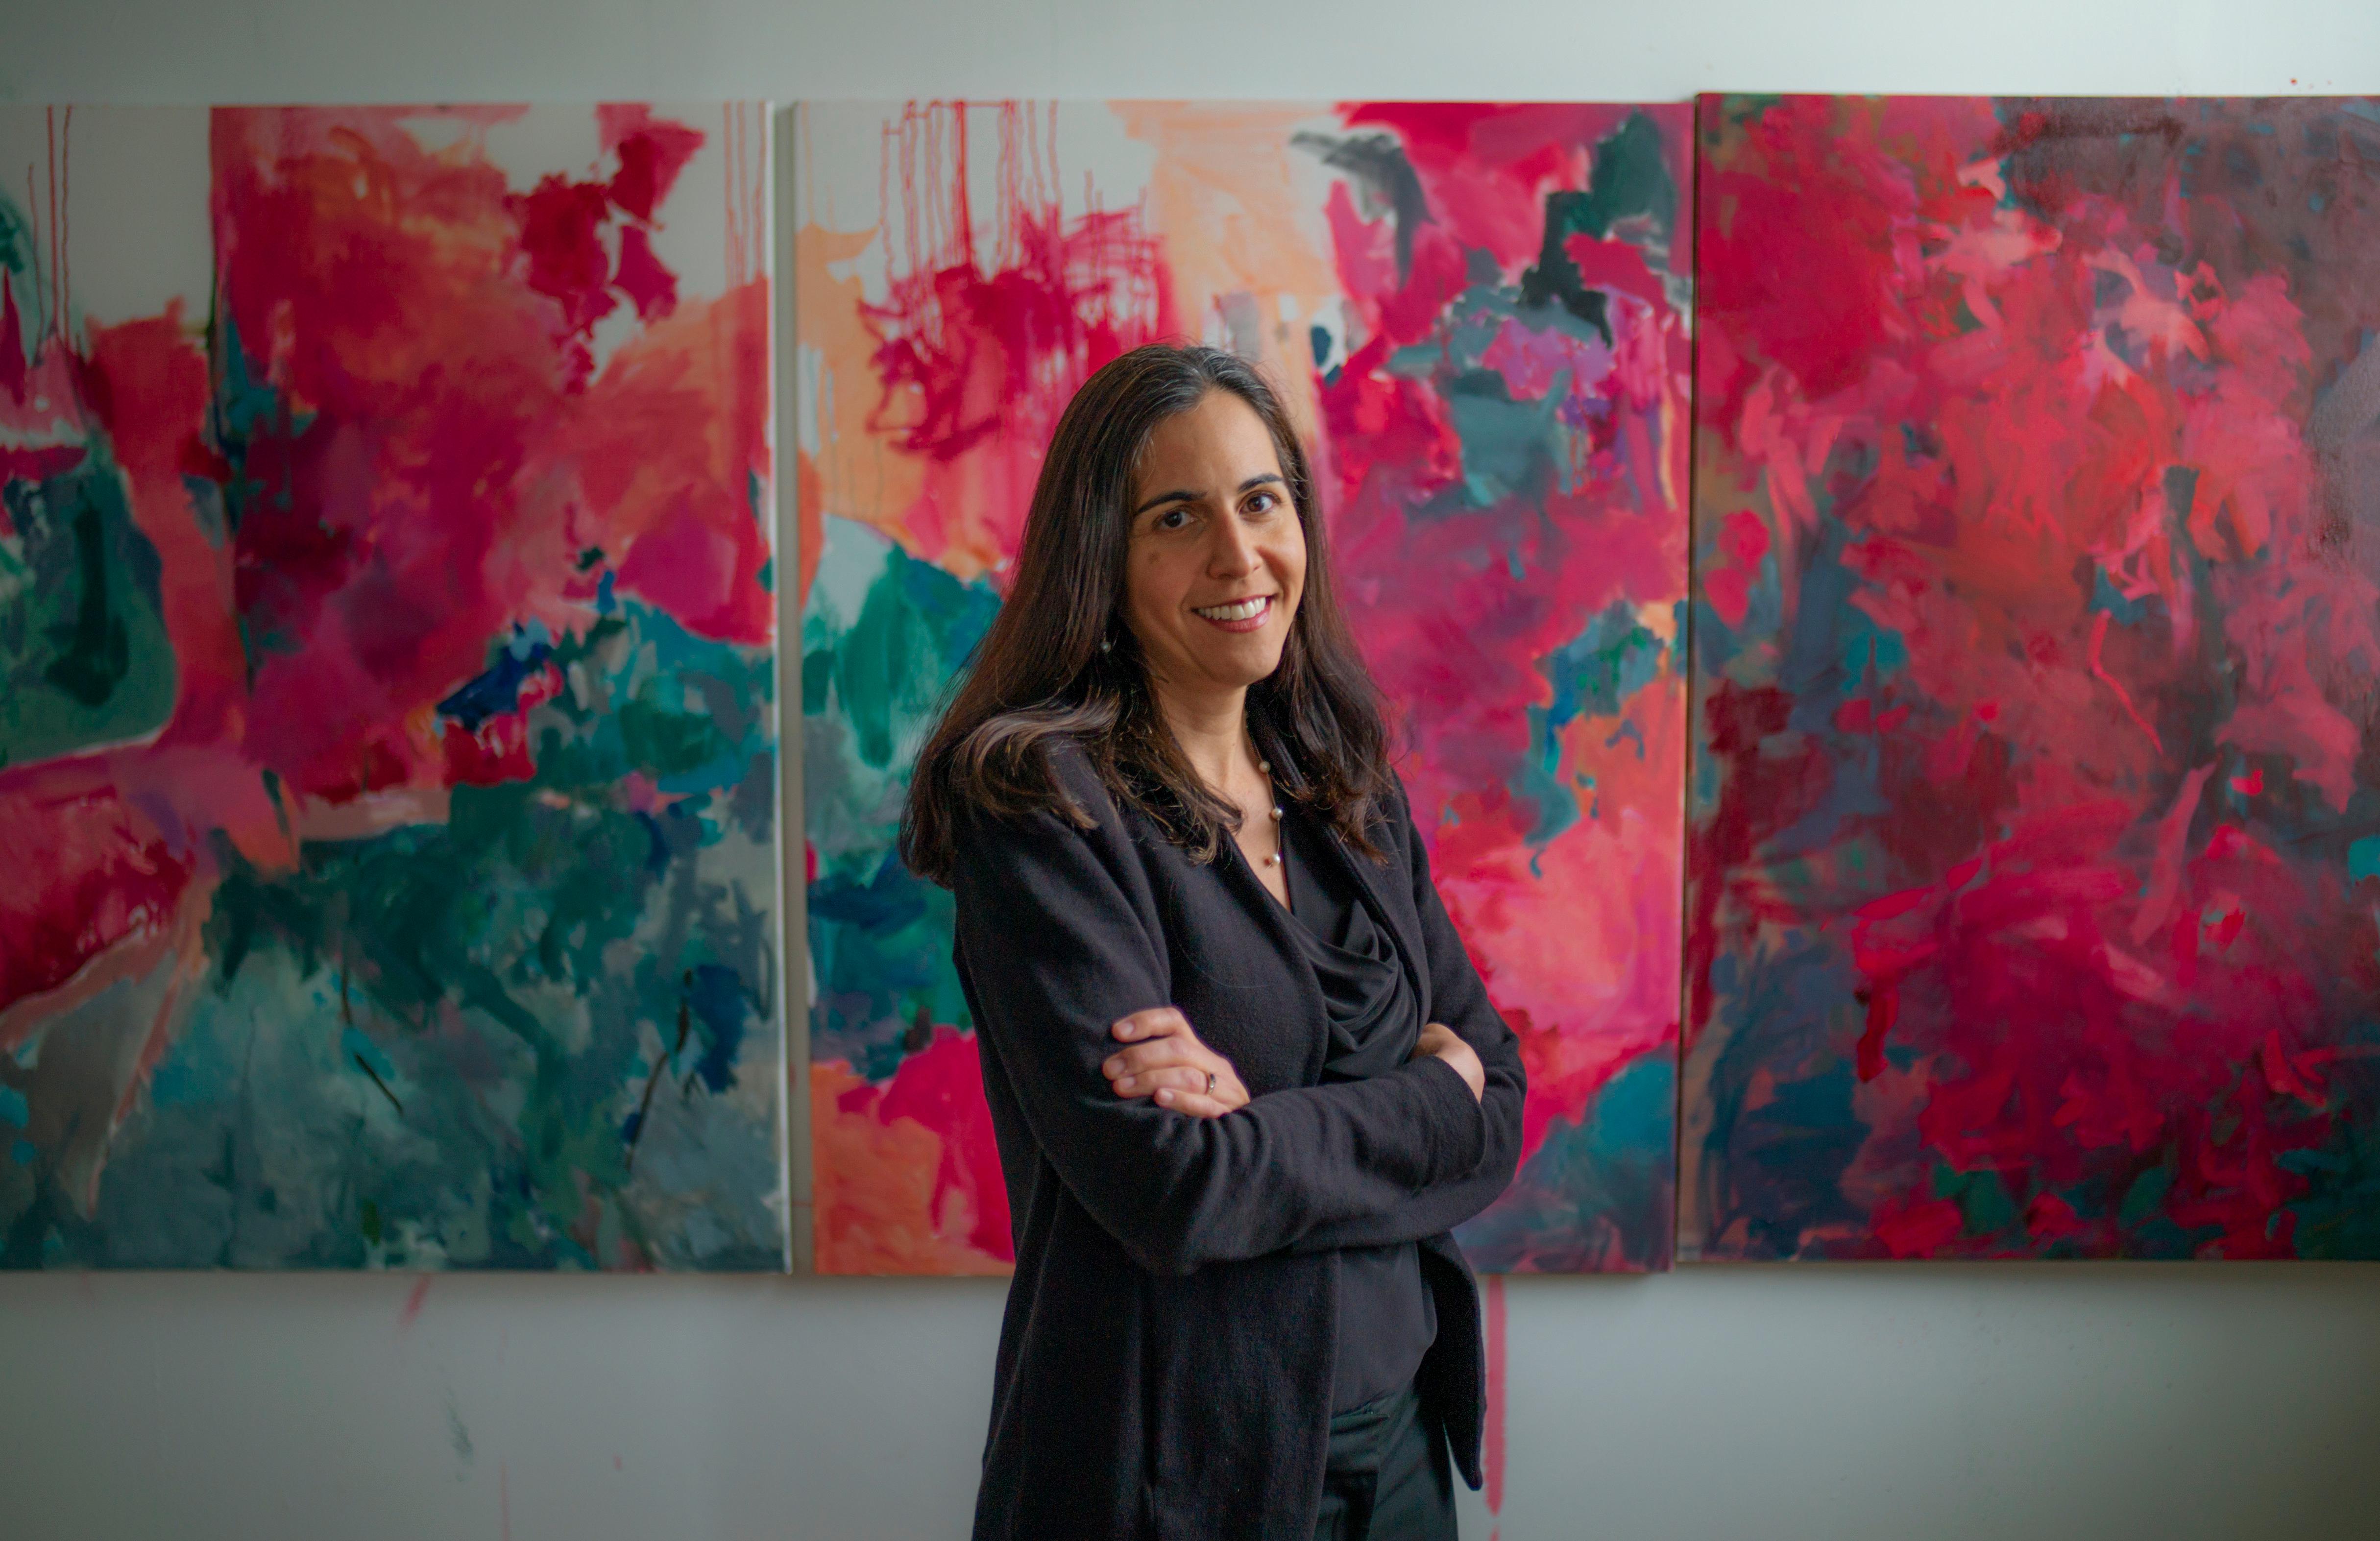 Nazanin Moghbeli is an Iranian-American artist with training in Persian calligraphy, miniature painting, and music. She borrows techniques from Iranian calligraphy to create abstract drawings with traditional bamboo “ghalams,” or quills. Rather than